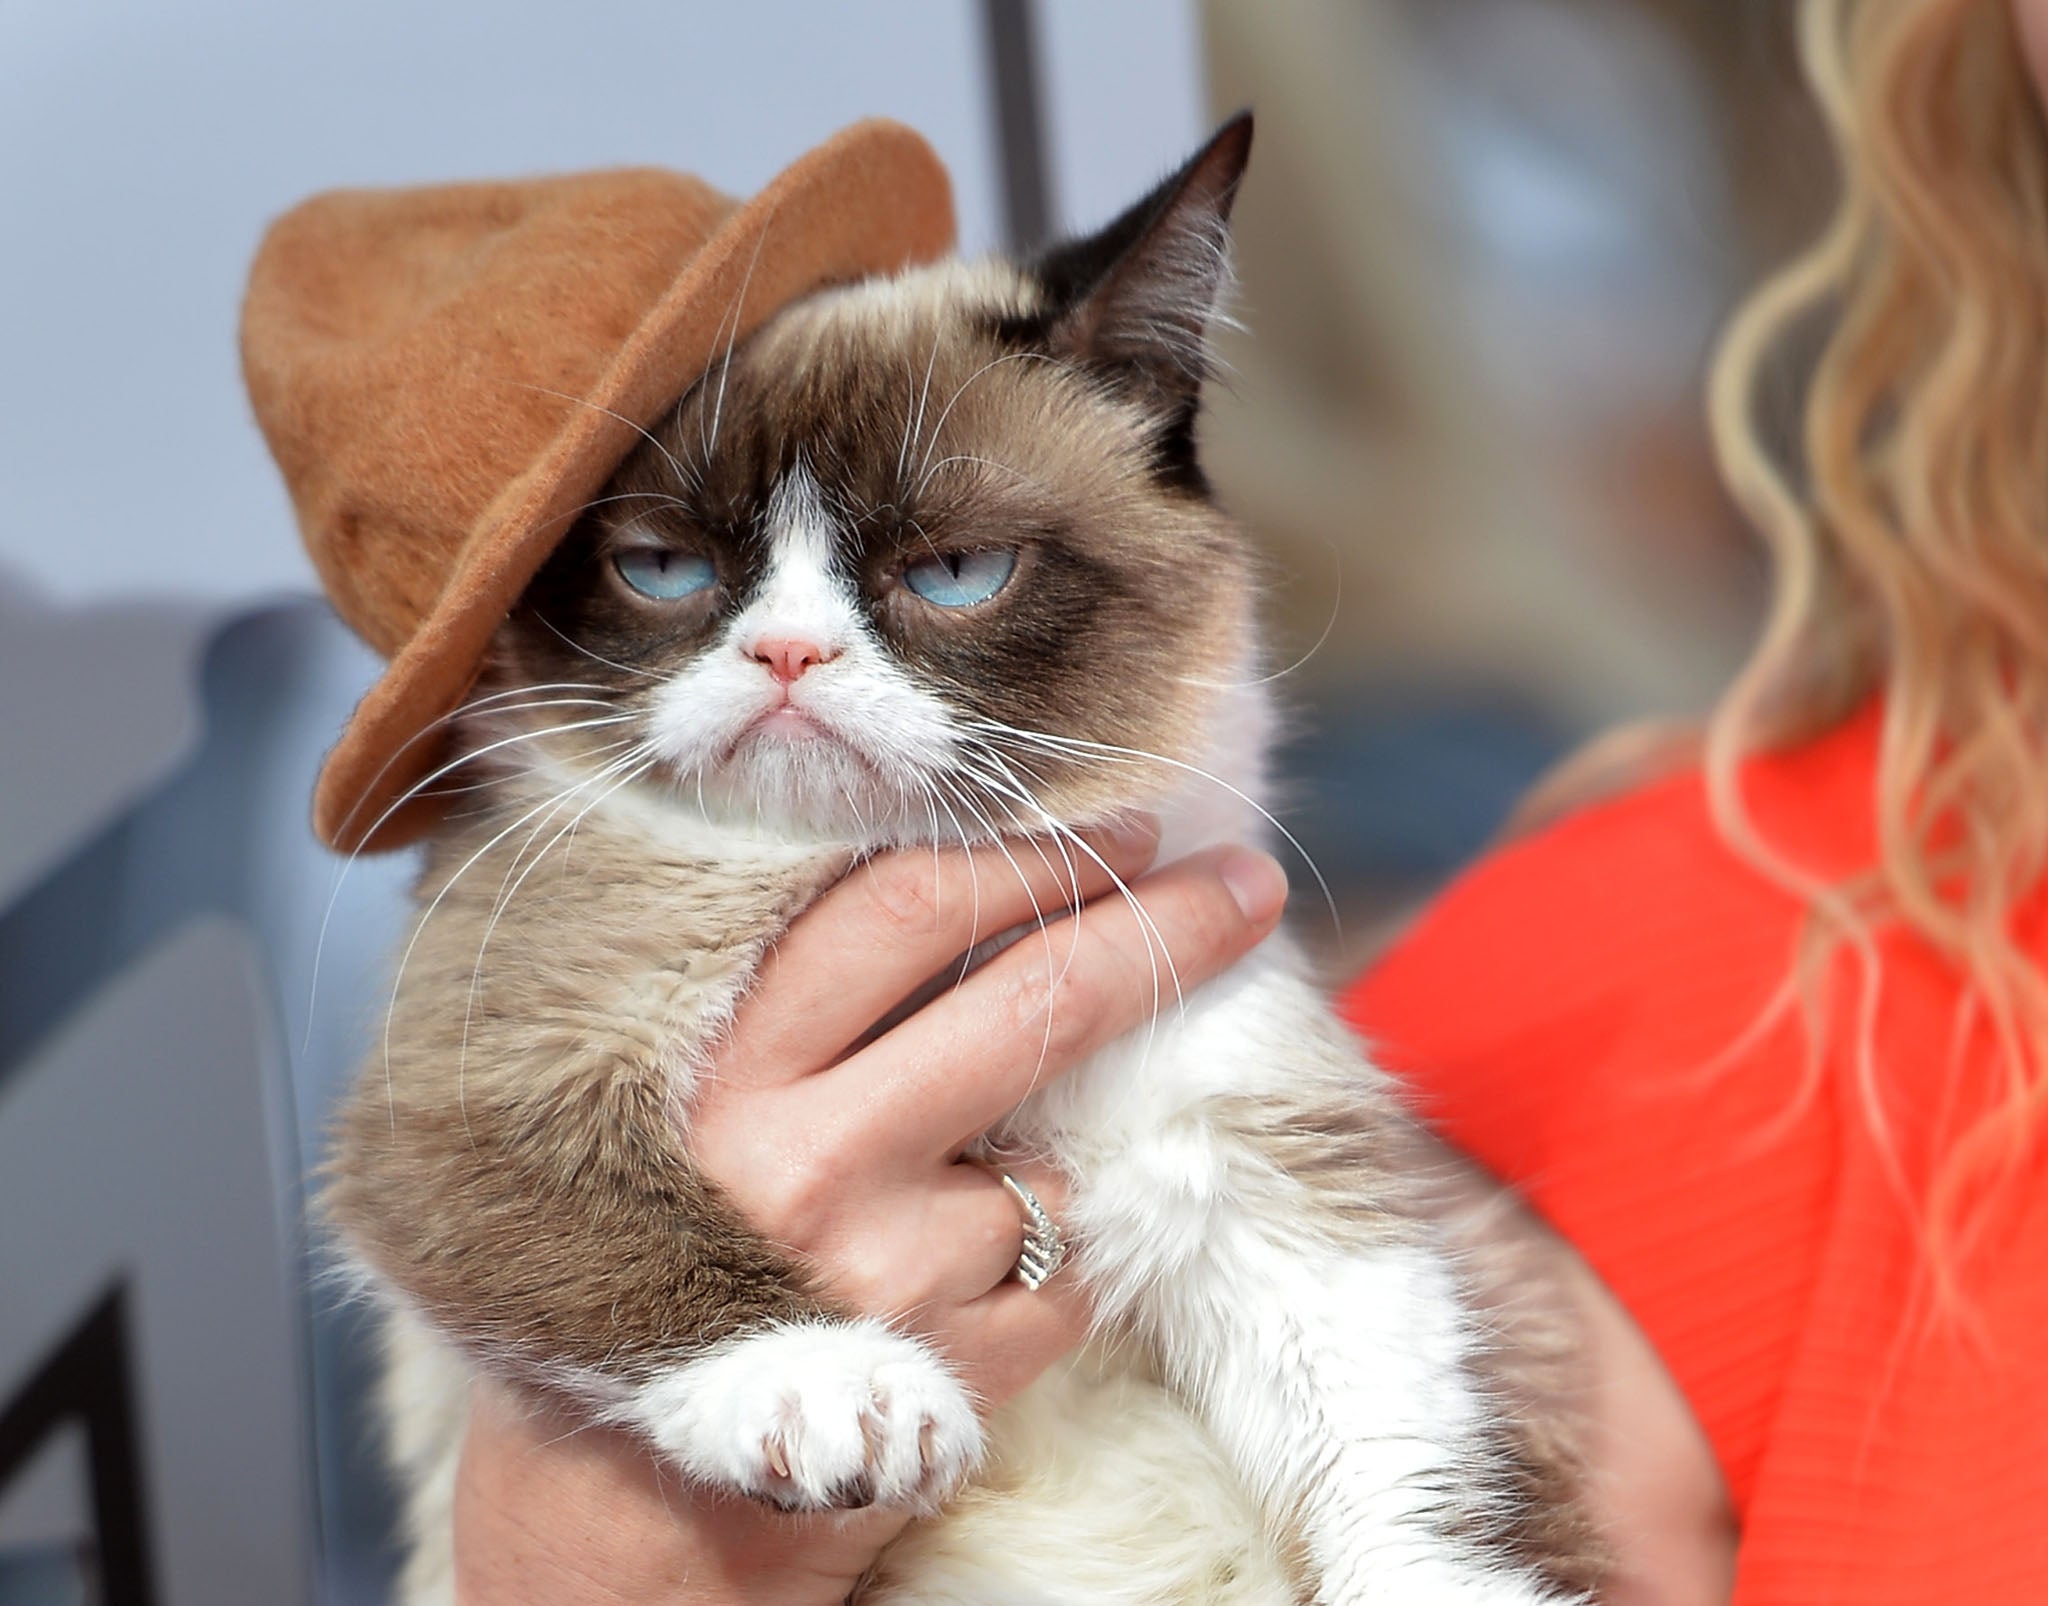 Grumpy Cat, another cat who has become an internet sensation